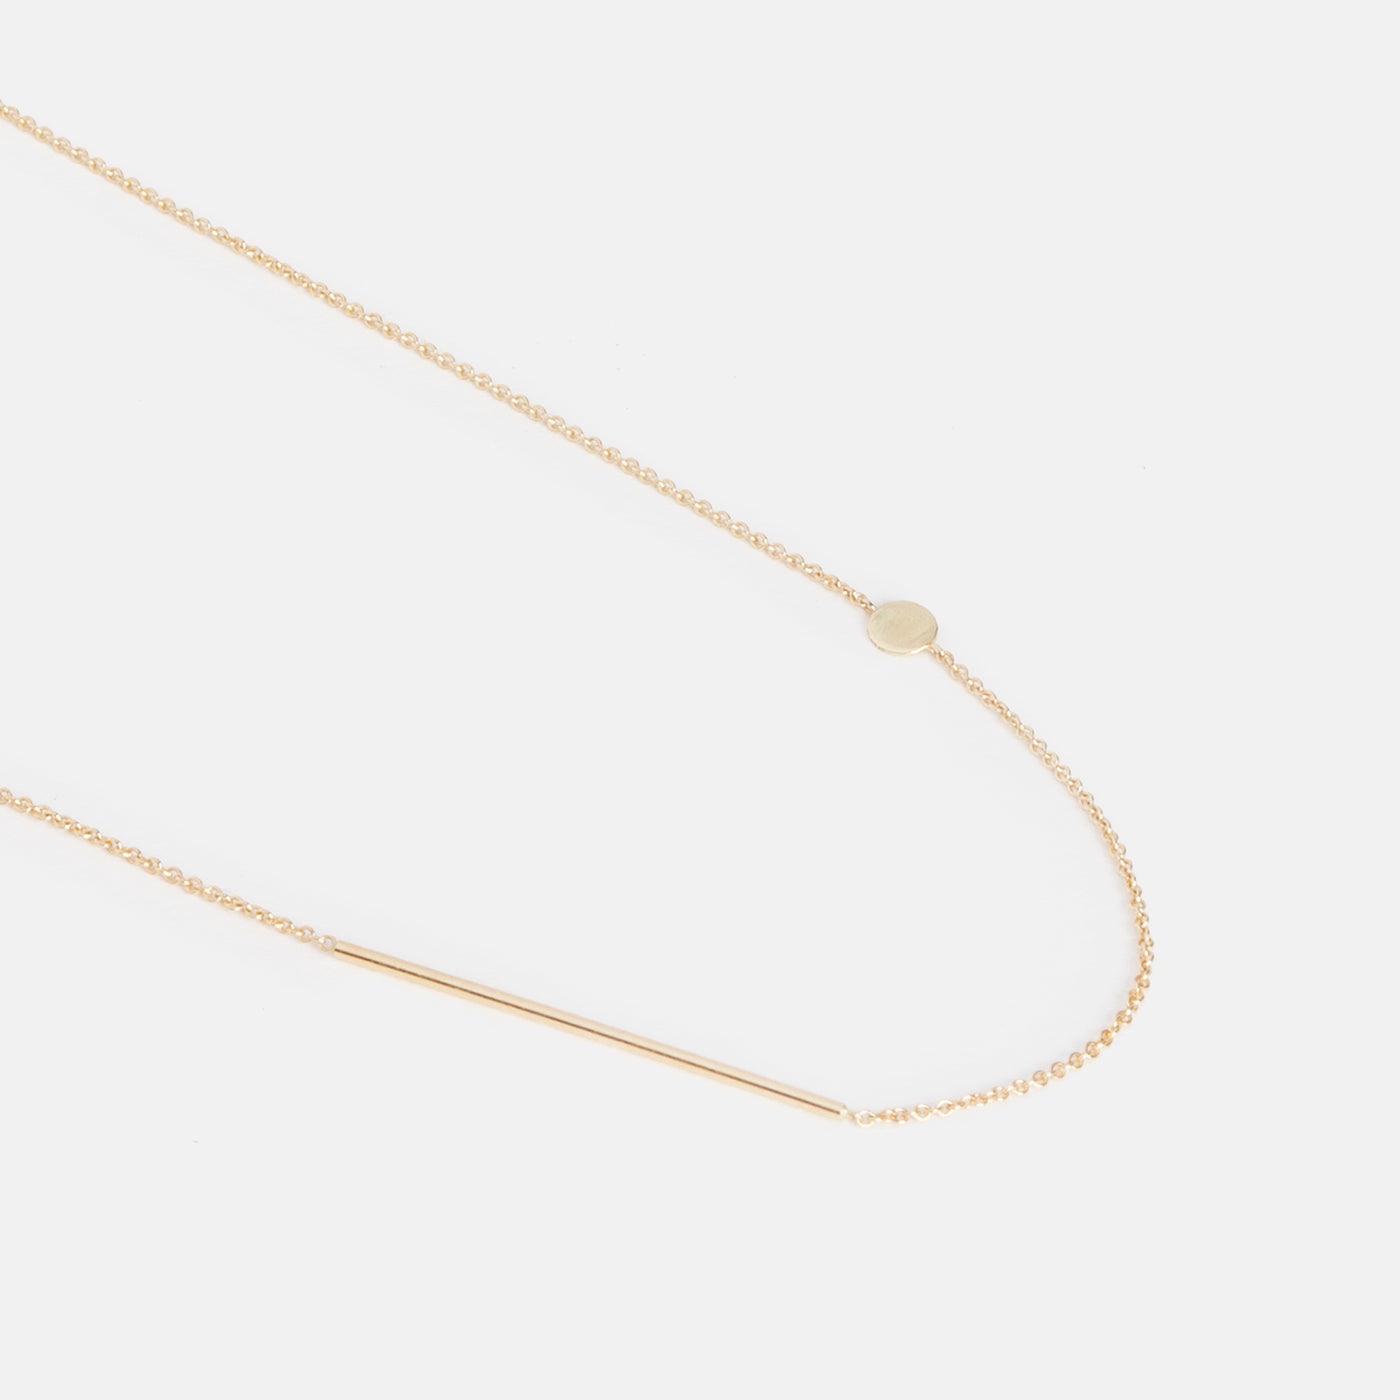 Niva Thin Necklace in 14k Gold By SHW Fine Jewelry NYC